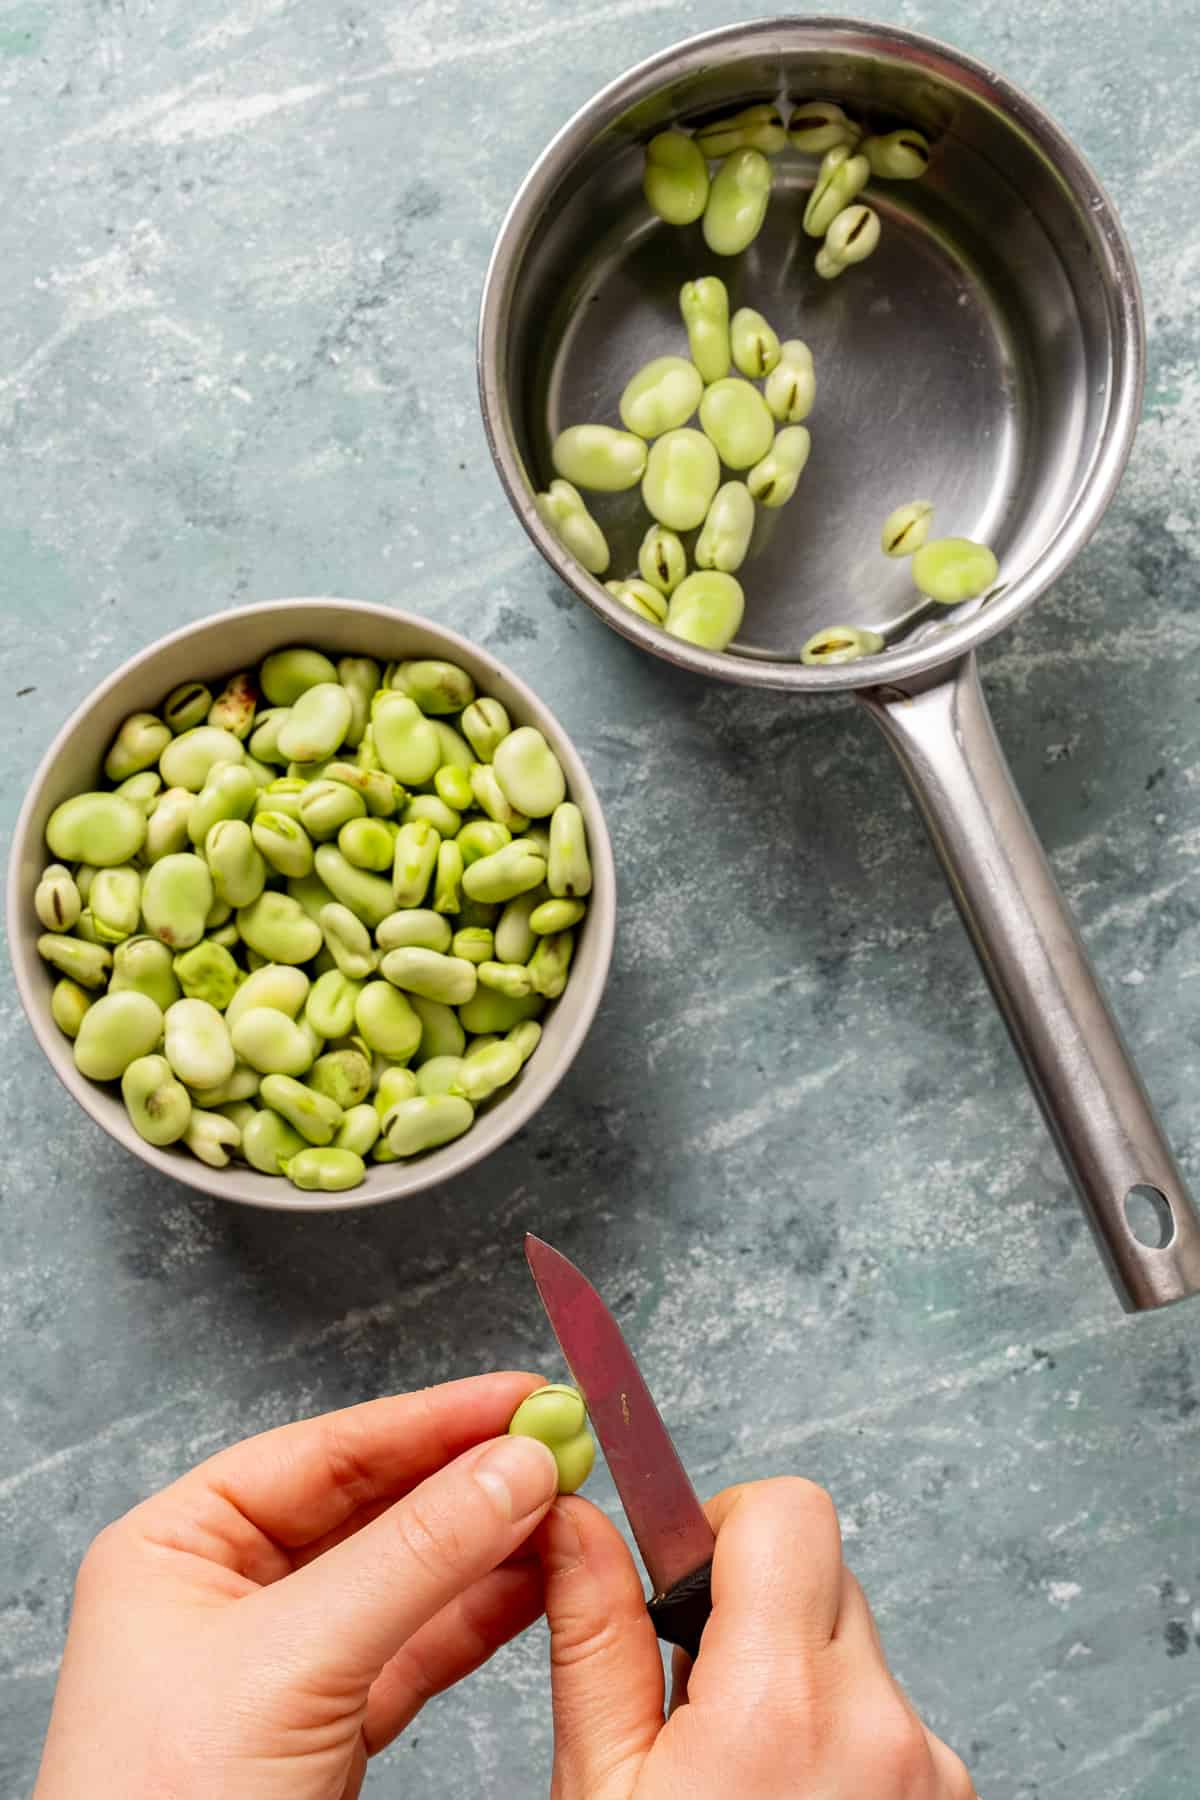 Hands making a slit on fava beans with a knife, fava beans in a bowl and in a saucepan filled with water.